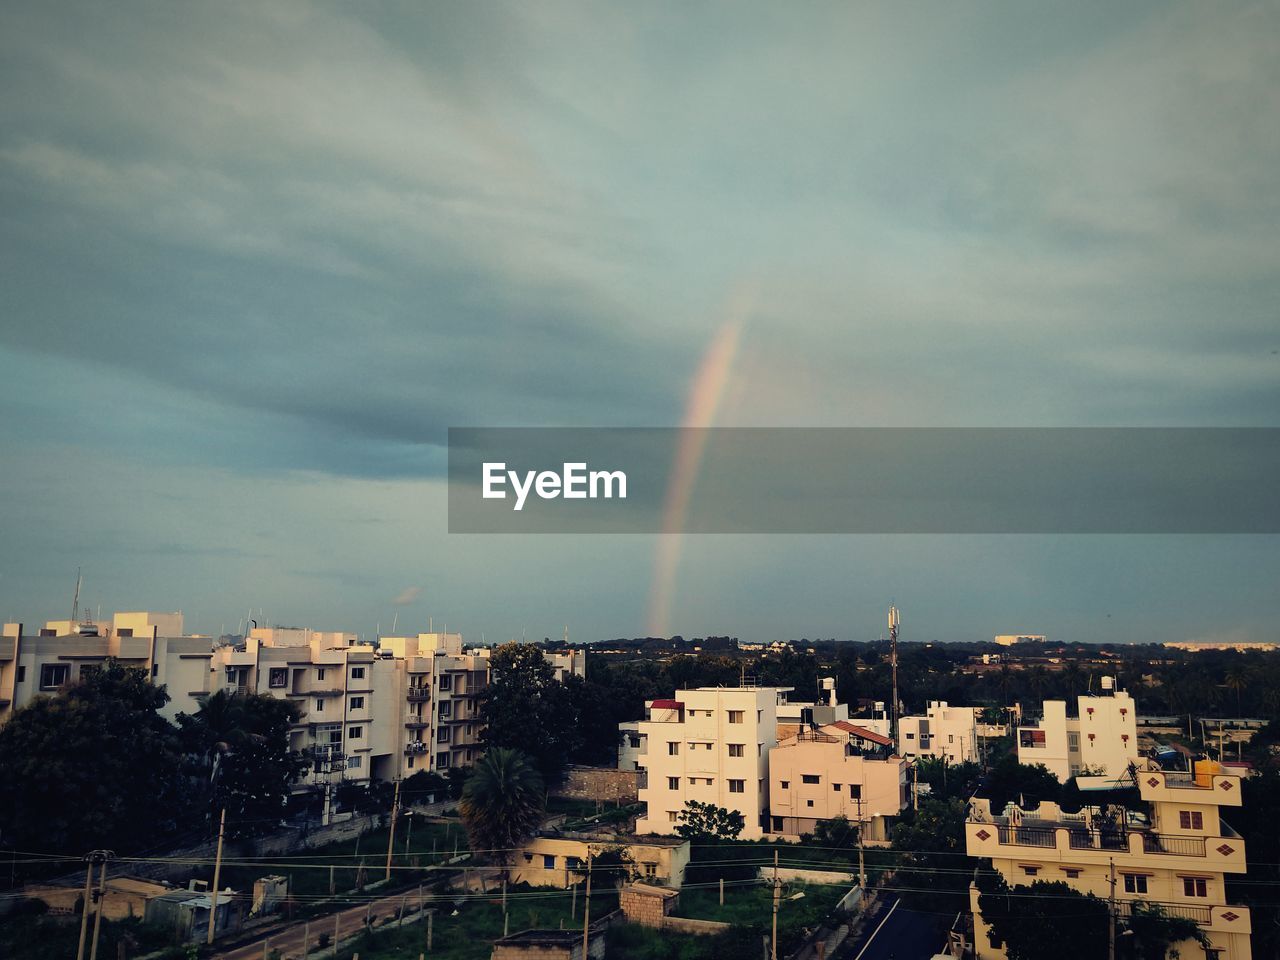 Rainbow in a residential settlement